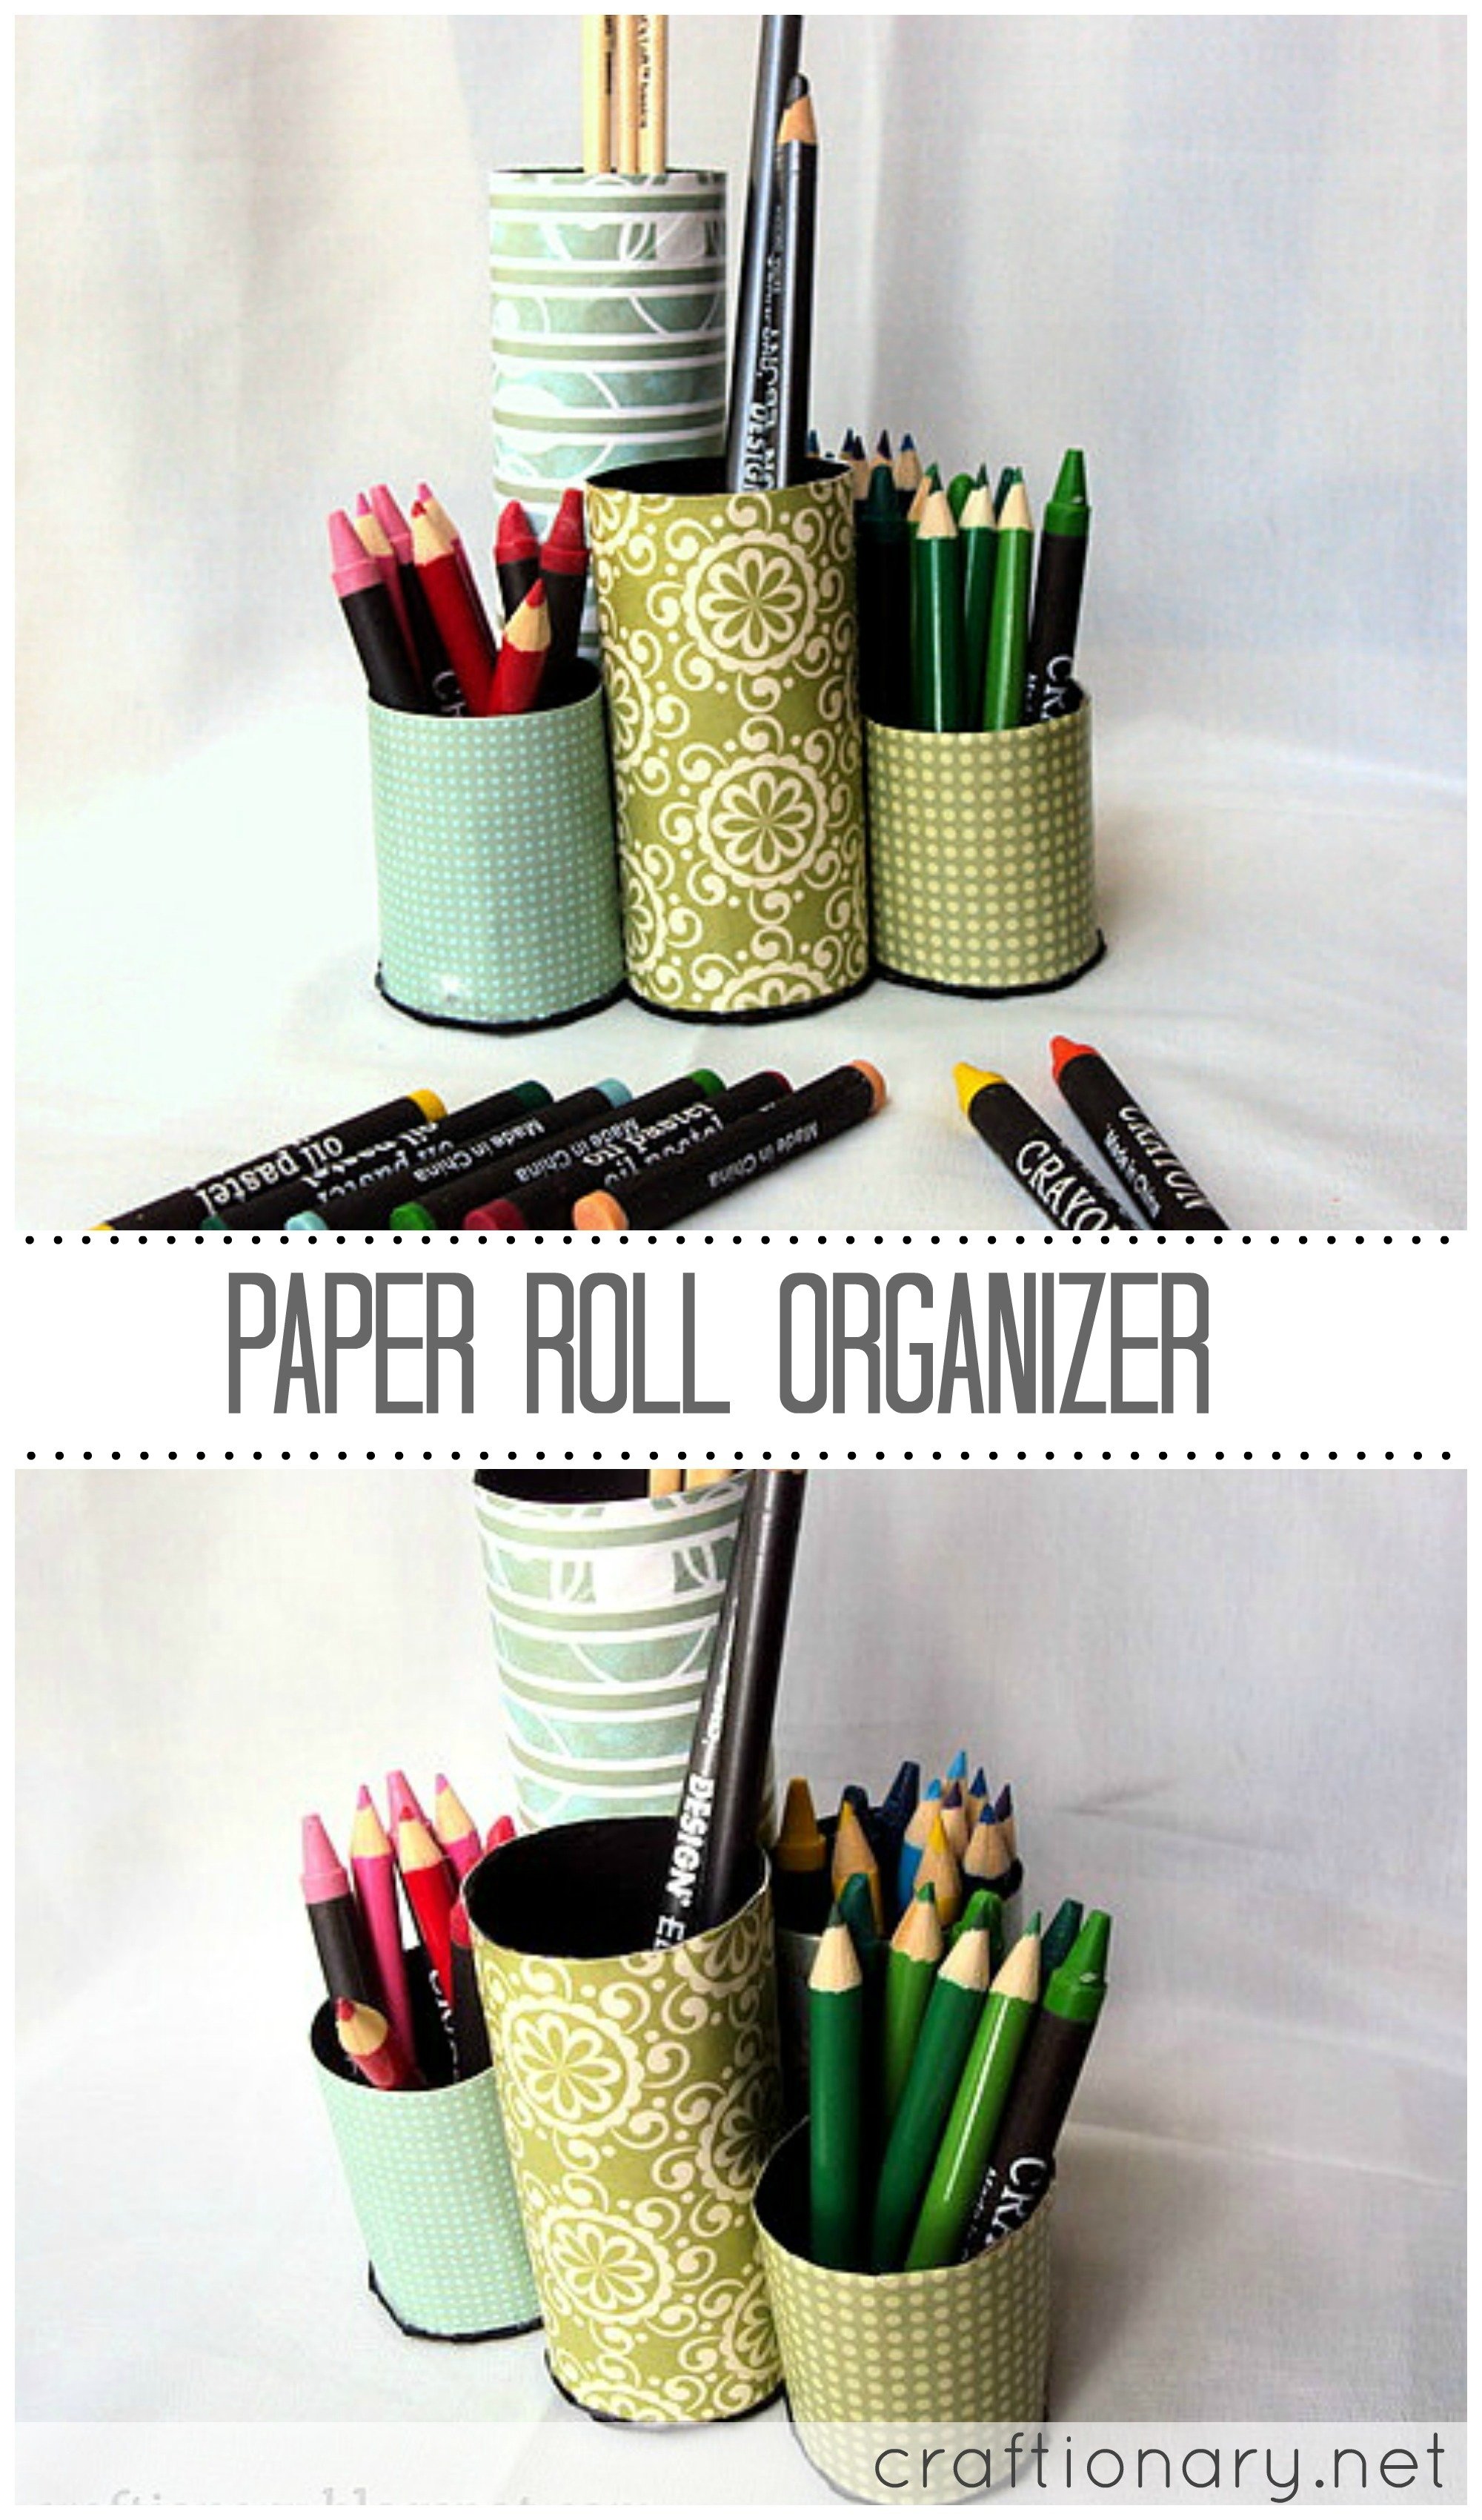 10 Awesome Recycled Projects For School Ideas recycle paper roll 2022